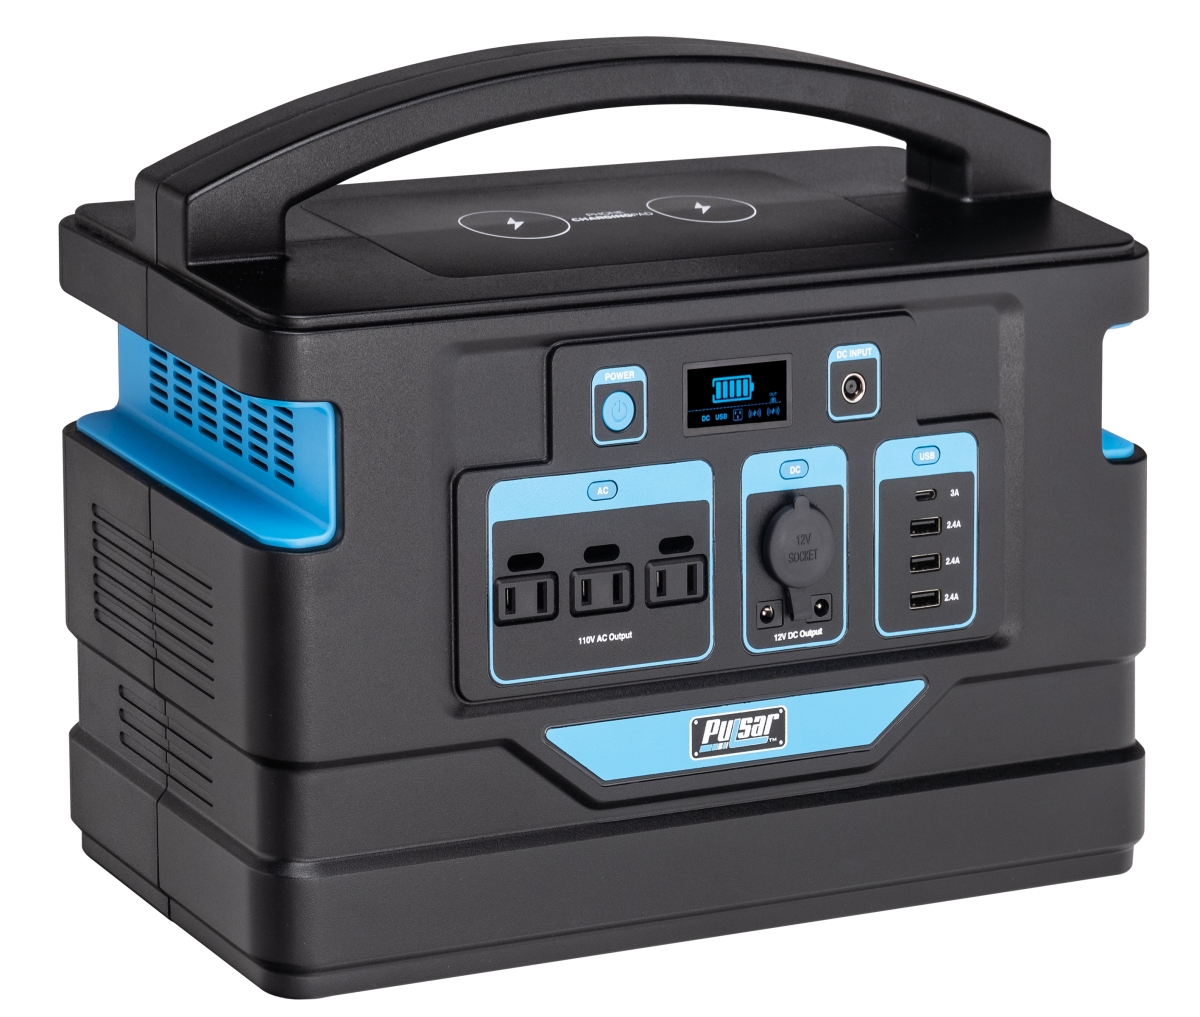 tool 1000 Watt Lithium-Ion Portable Power Station with LCD Display & Wireless Charging Pads